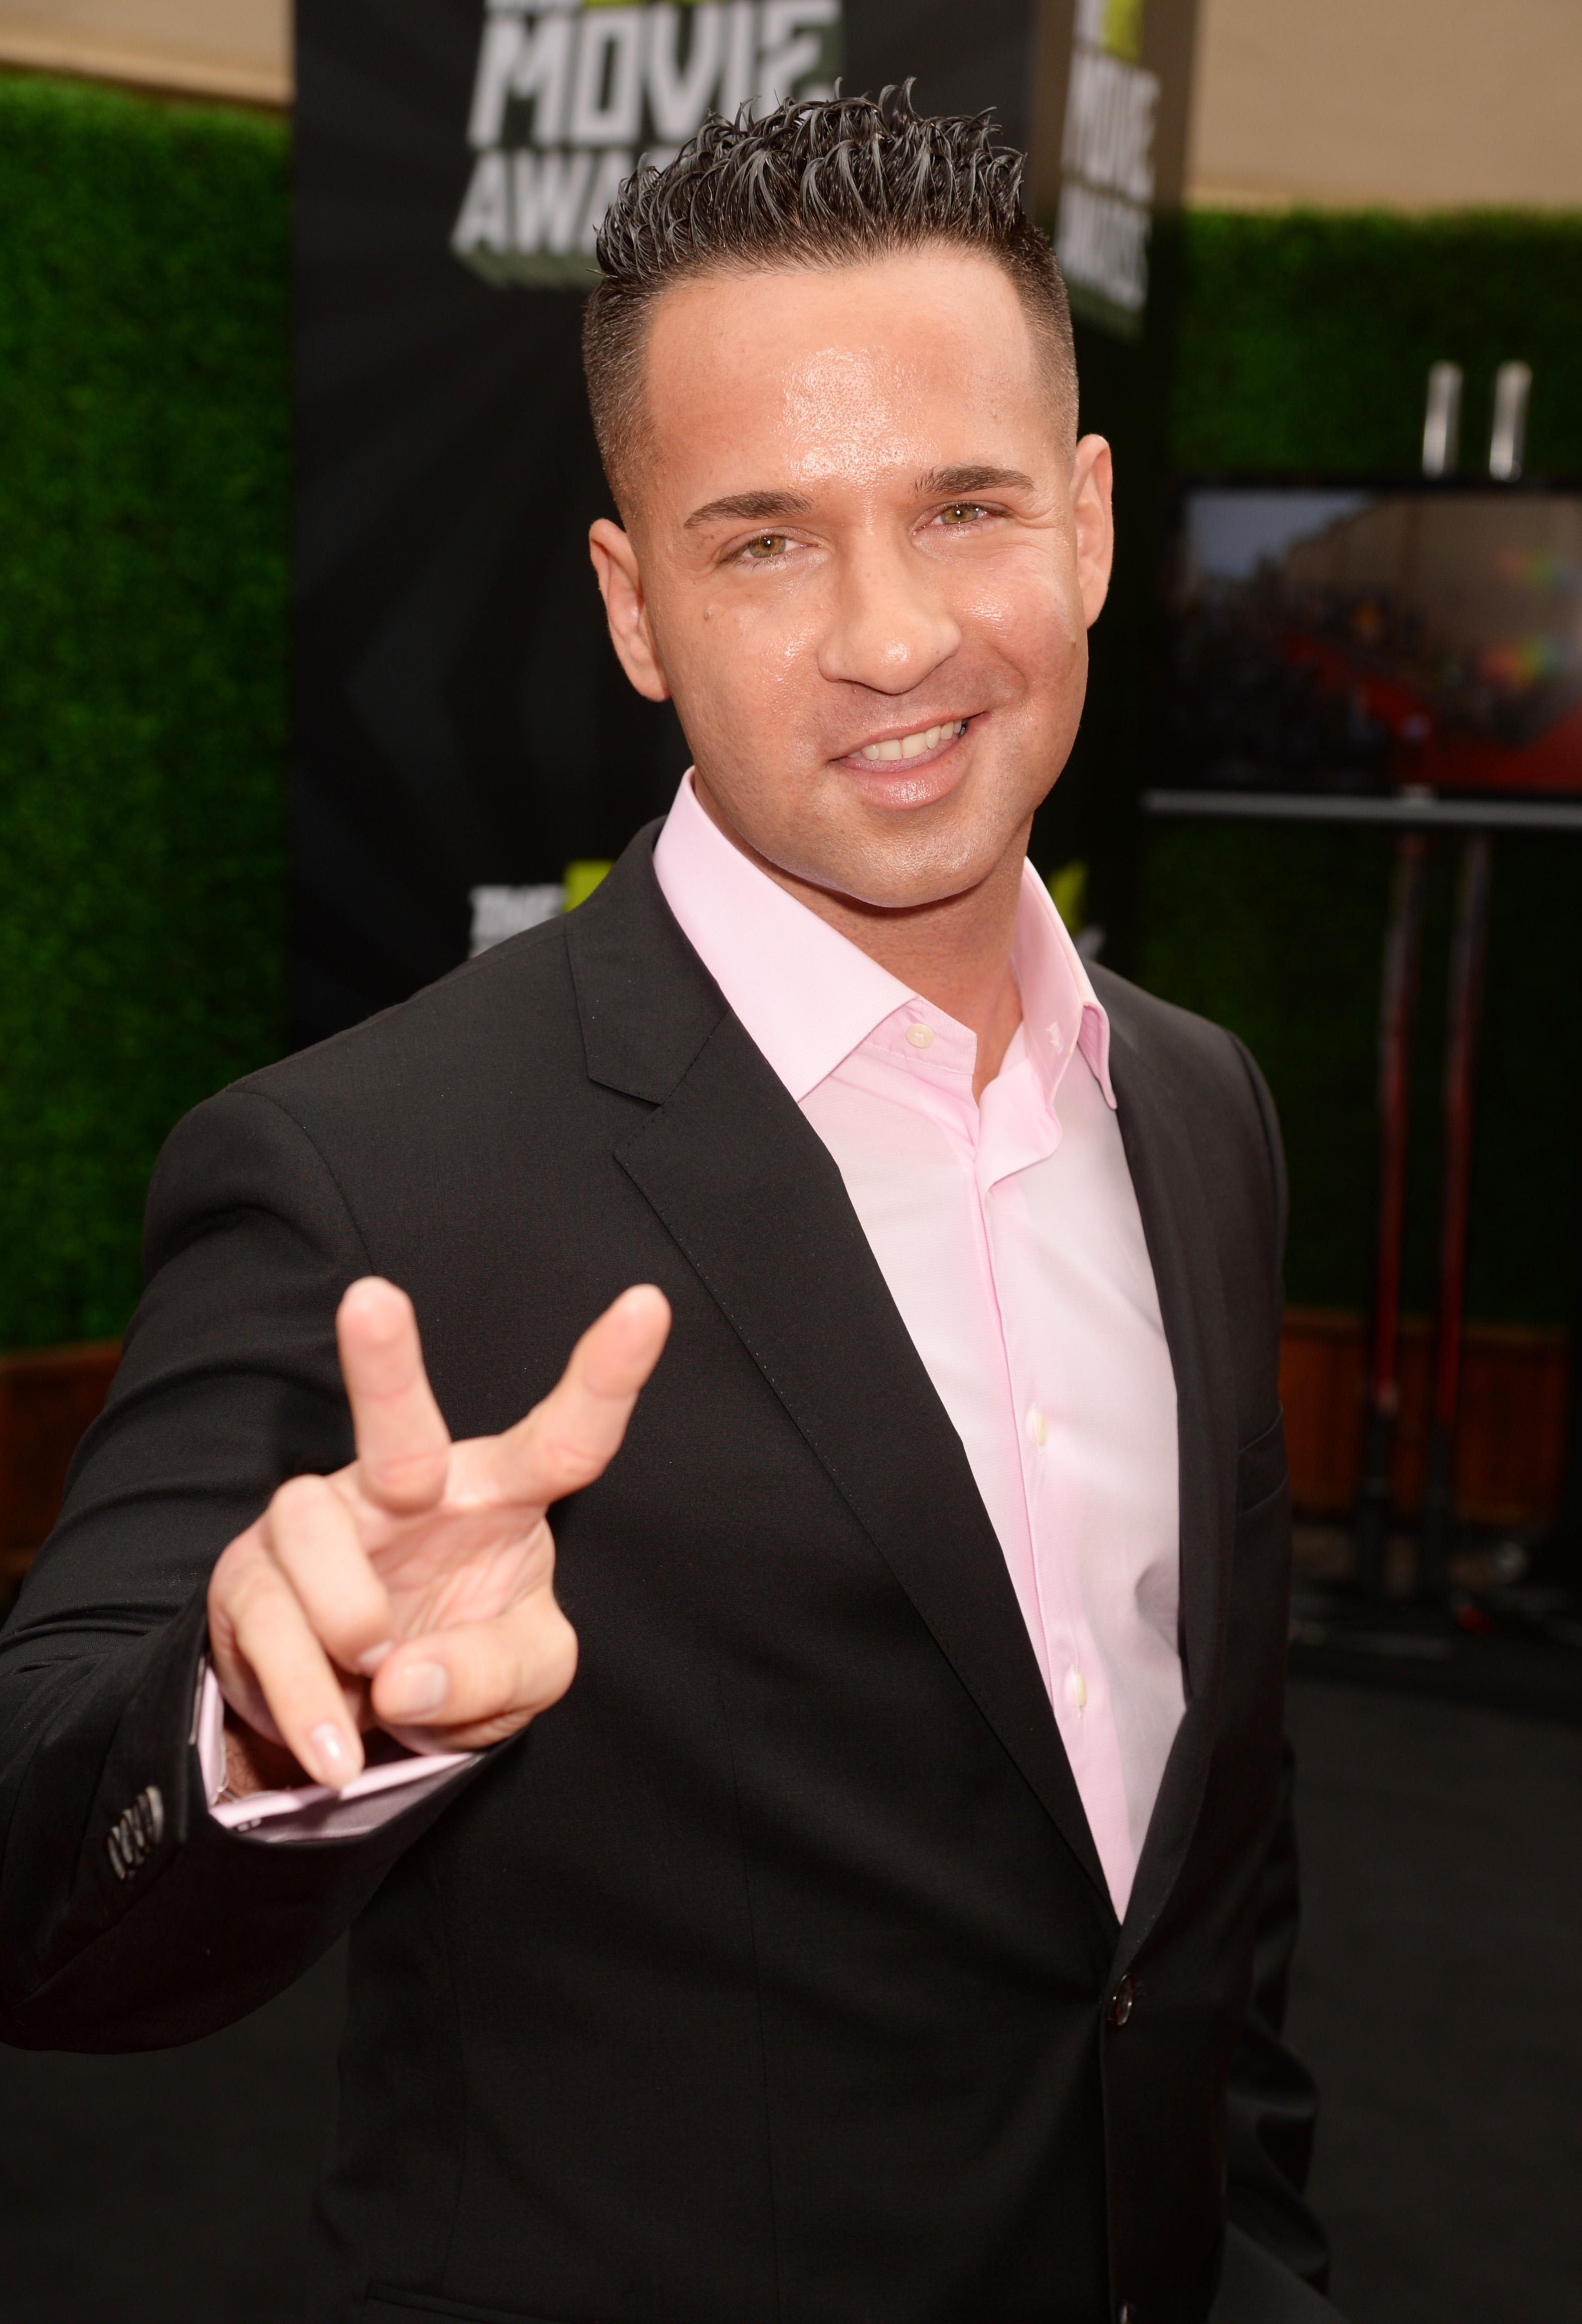 TV personality Mike 'The Situation' Sorrentino attends the 2013 MTV Movie Awards at Sony Pictures Studios on April 14, 2013 in Culver City, California. (Jeff Kravitz—FilmMagic)